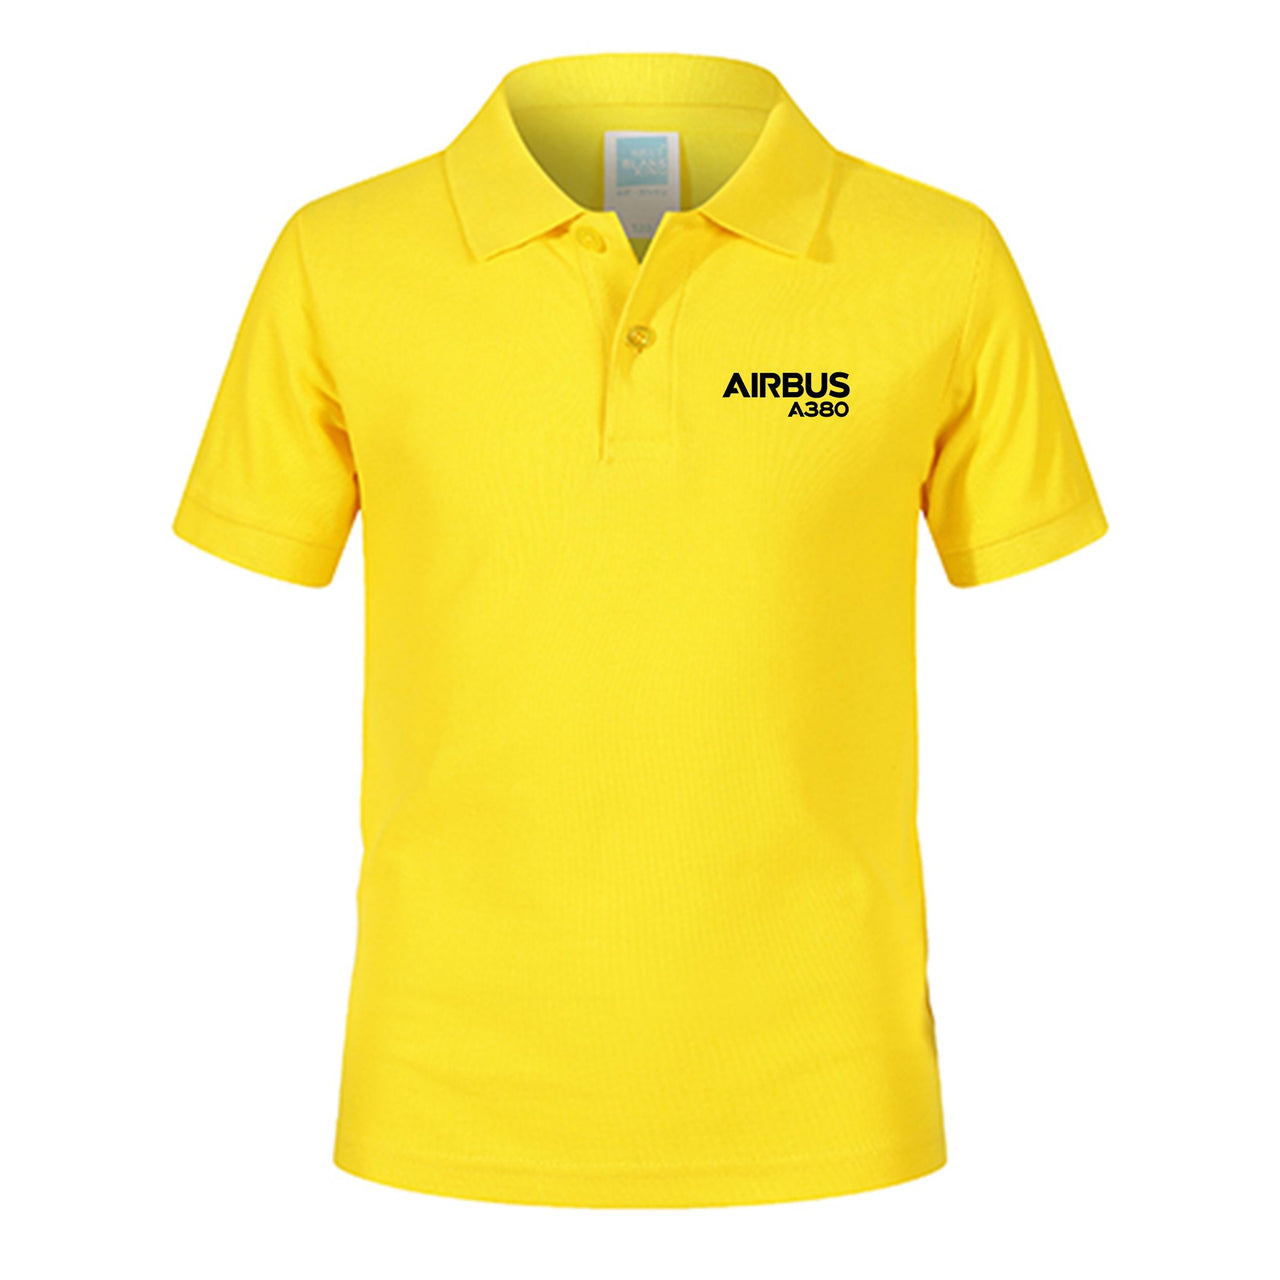 Airbus A380 & Text Designed Children Polo T-Shirts